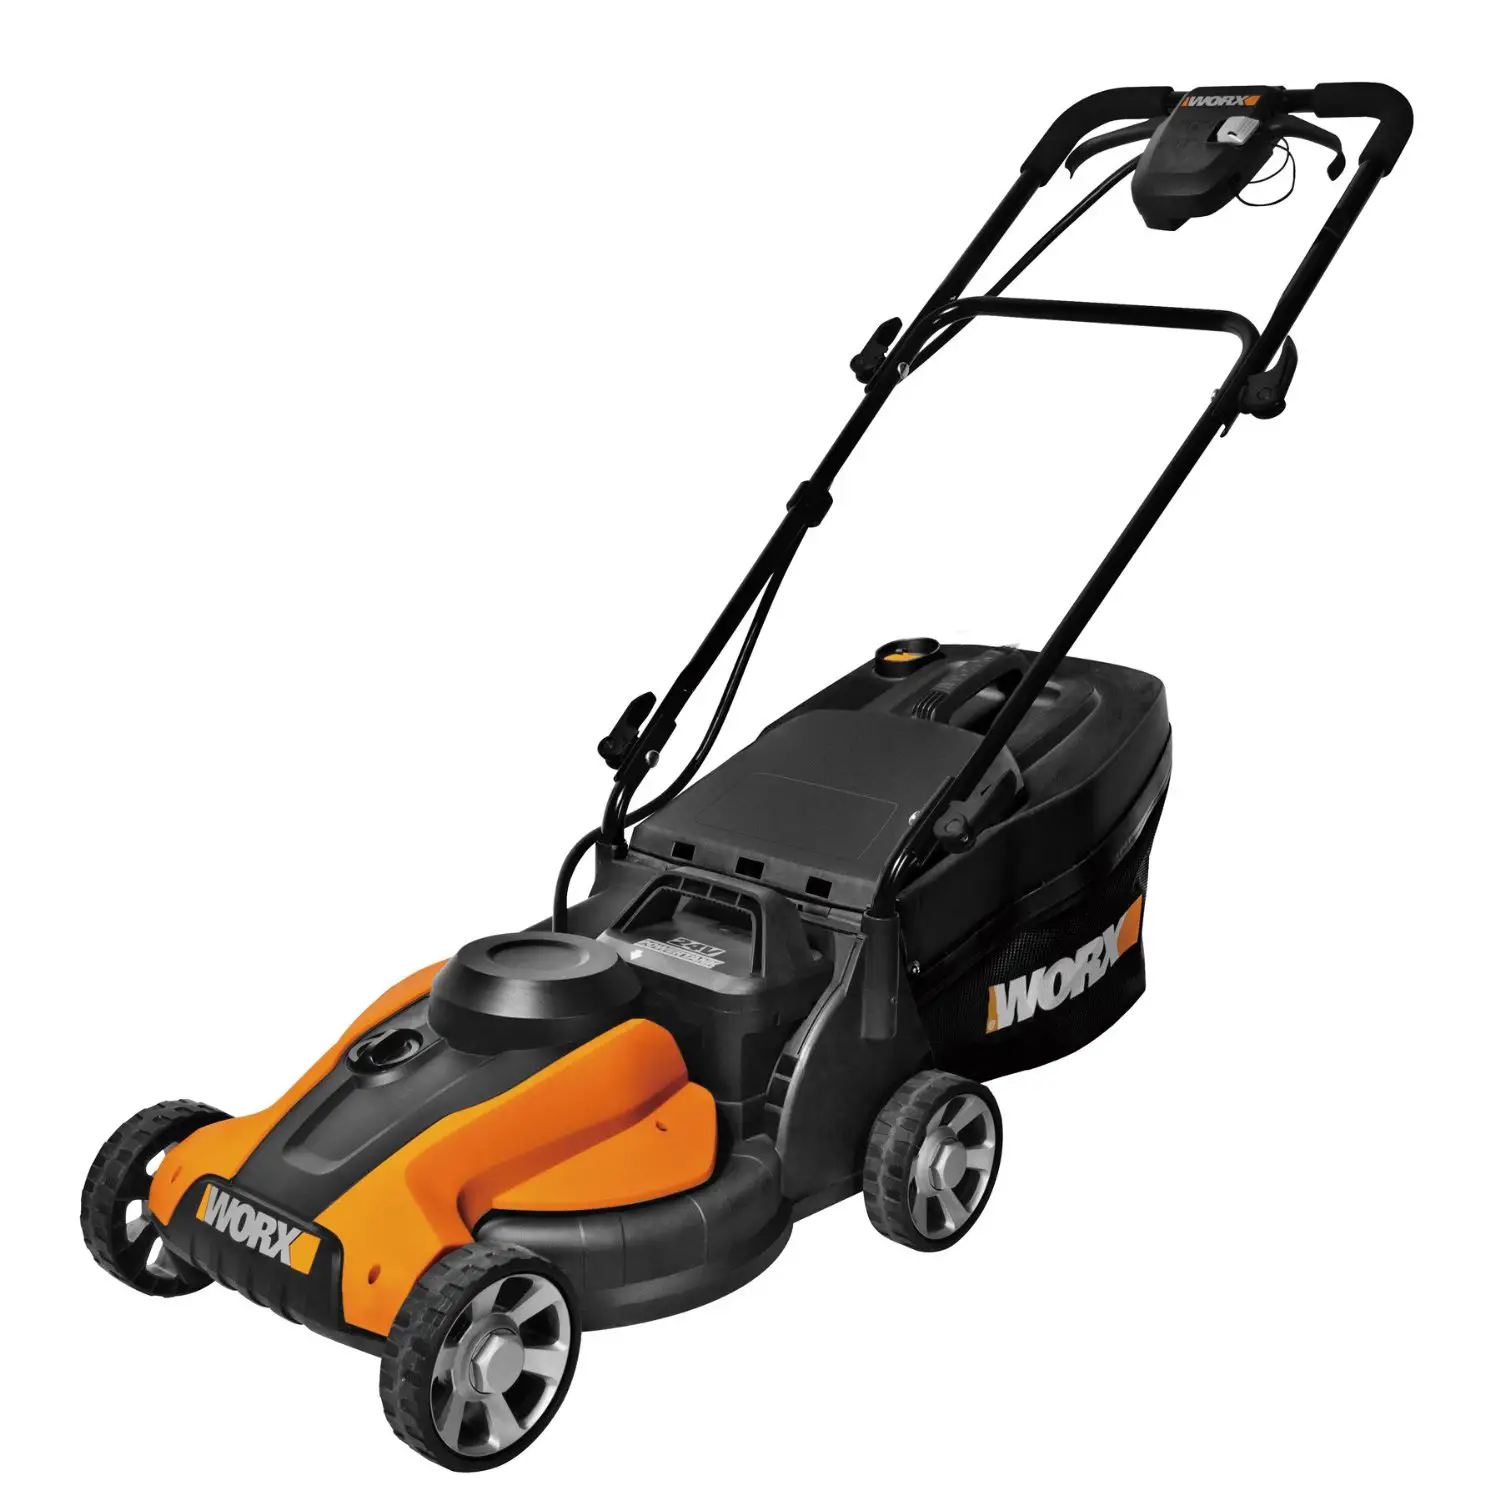 Gadgets For Your Home and Kitchen: Worx WG782 14